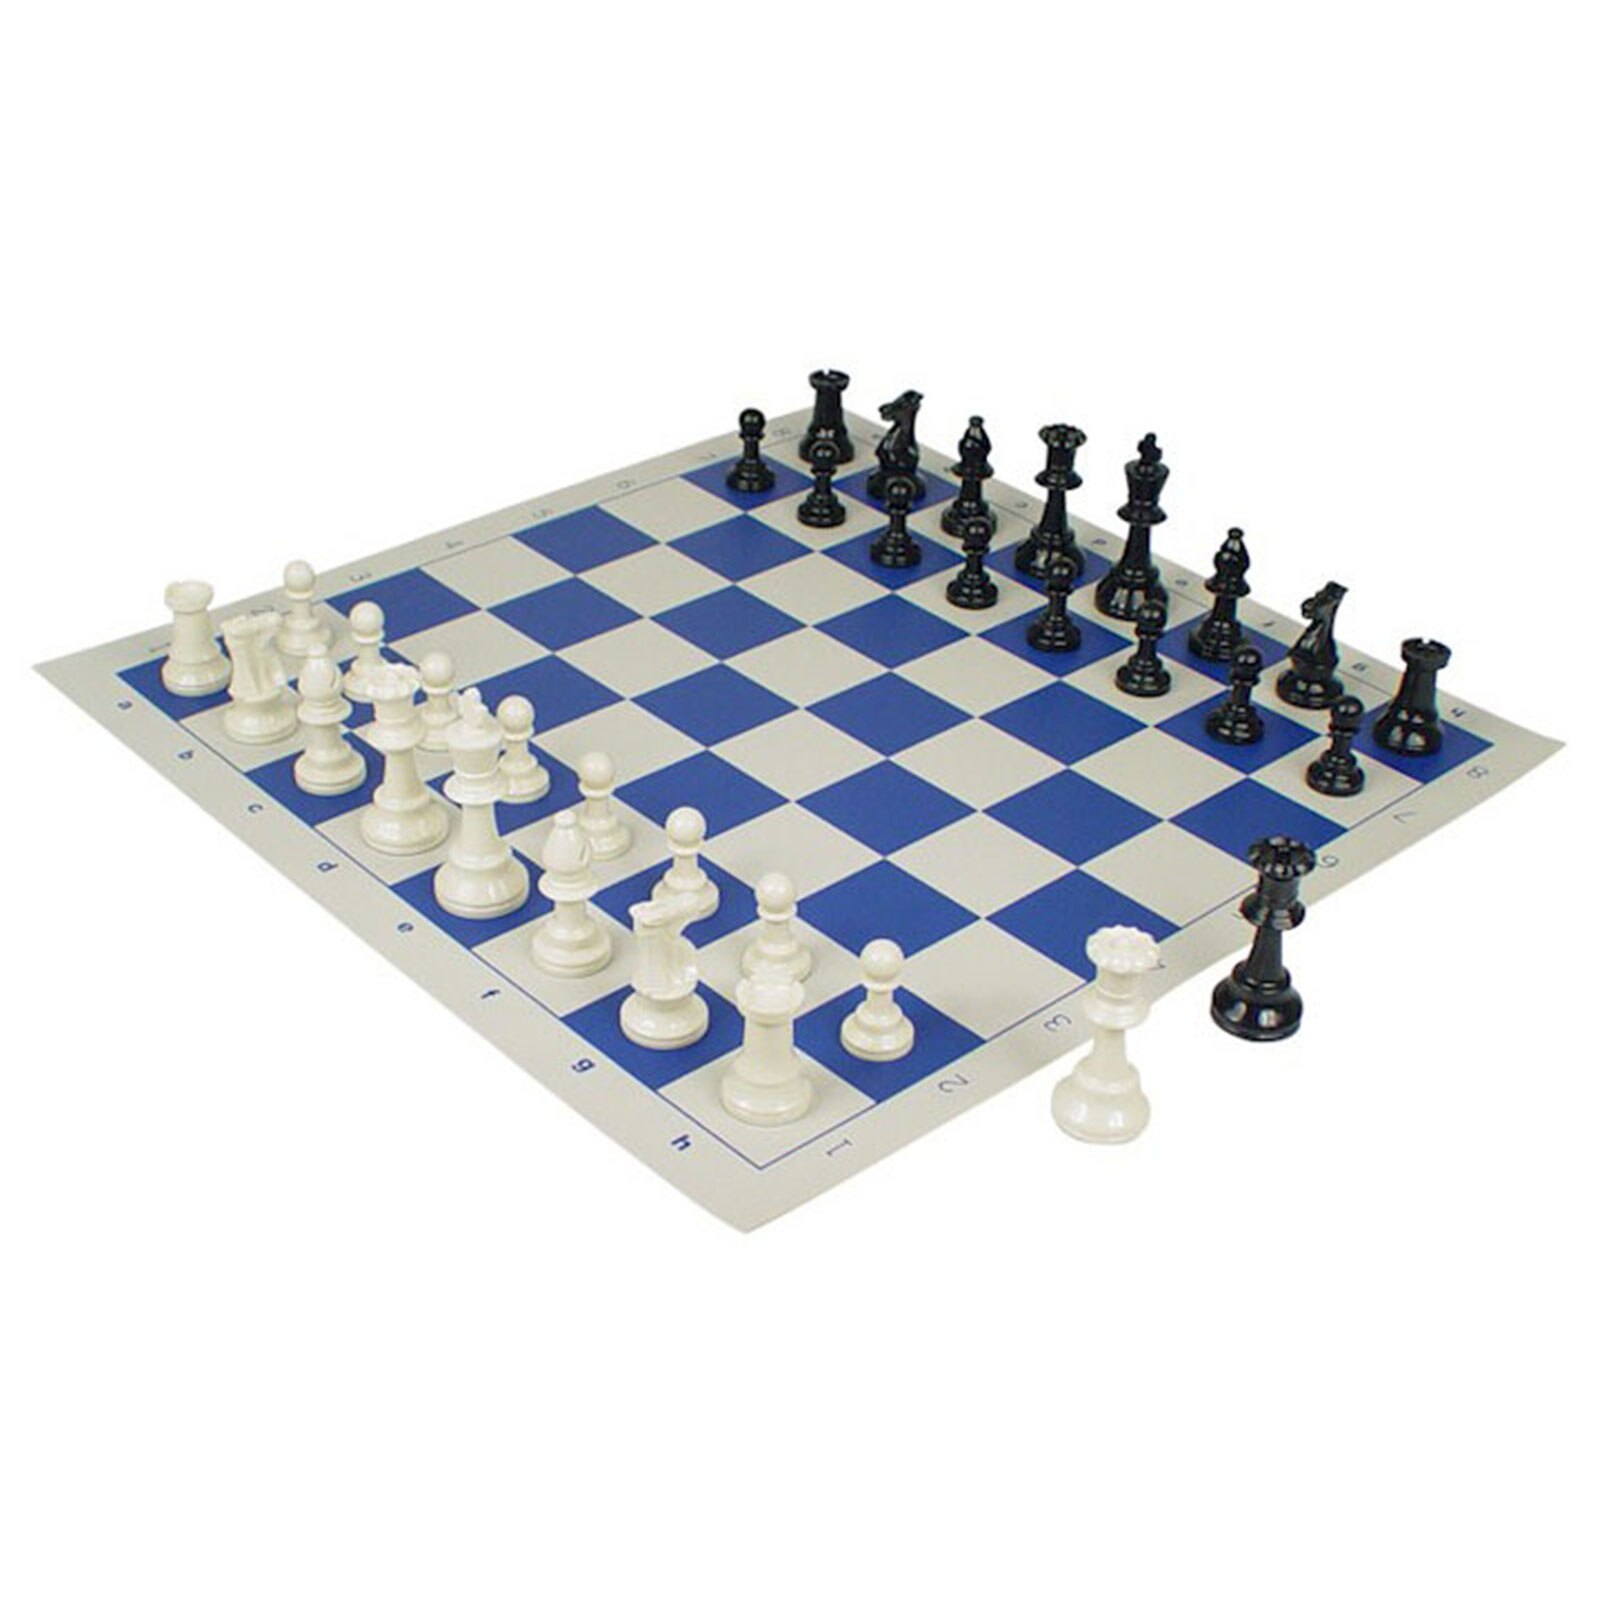 Medieval Wooden Chess Set Tournament Chess With Vinyl Chessboard Board Games Travel Chess Pieces Board Game Kids Toy